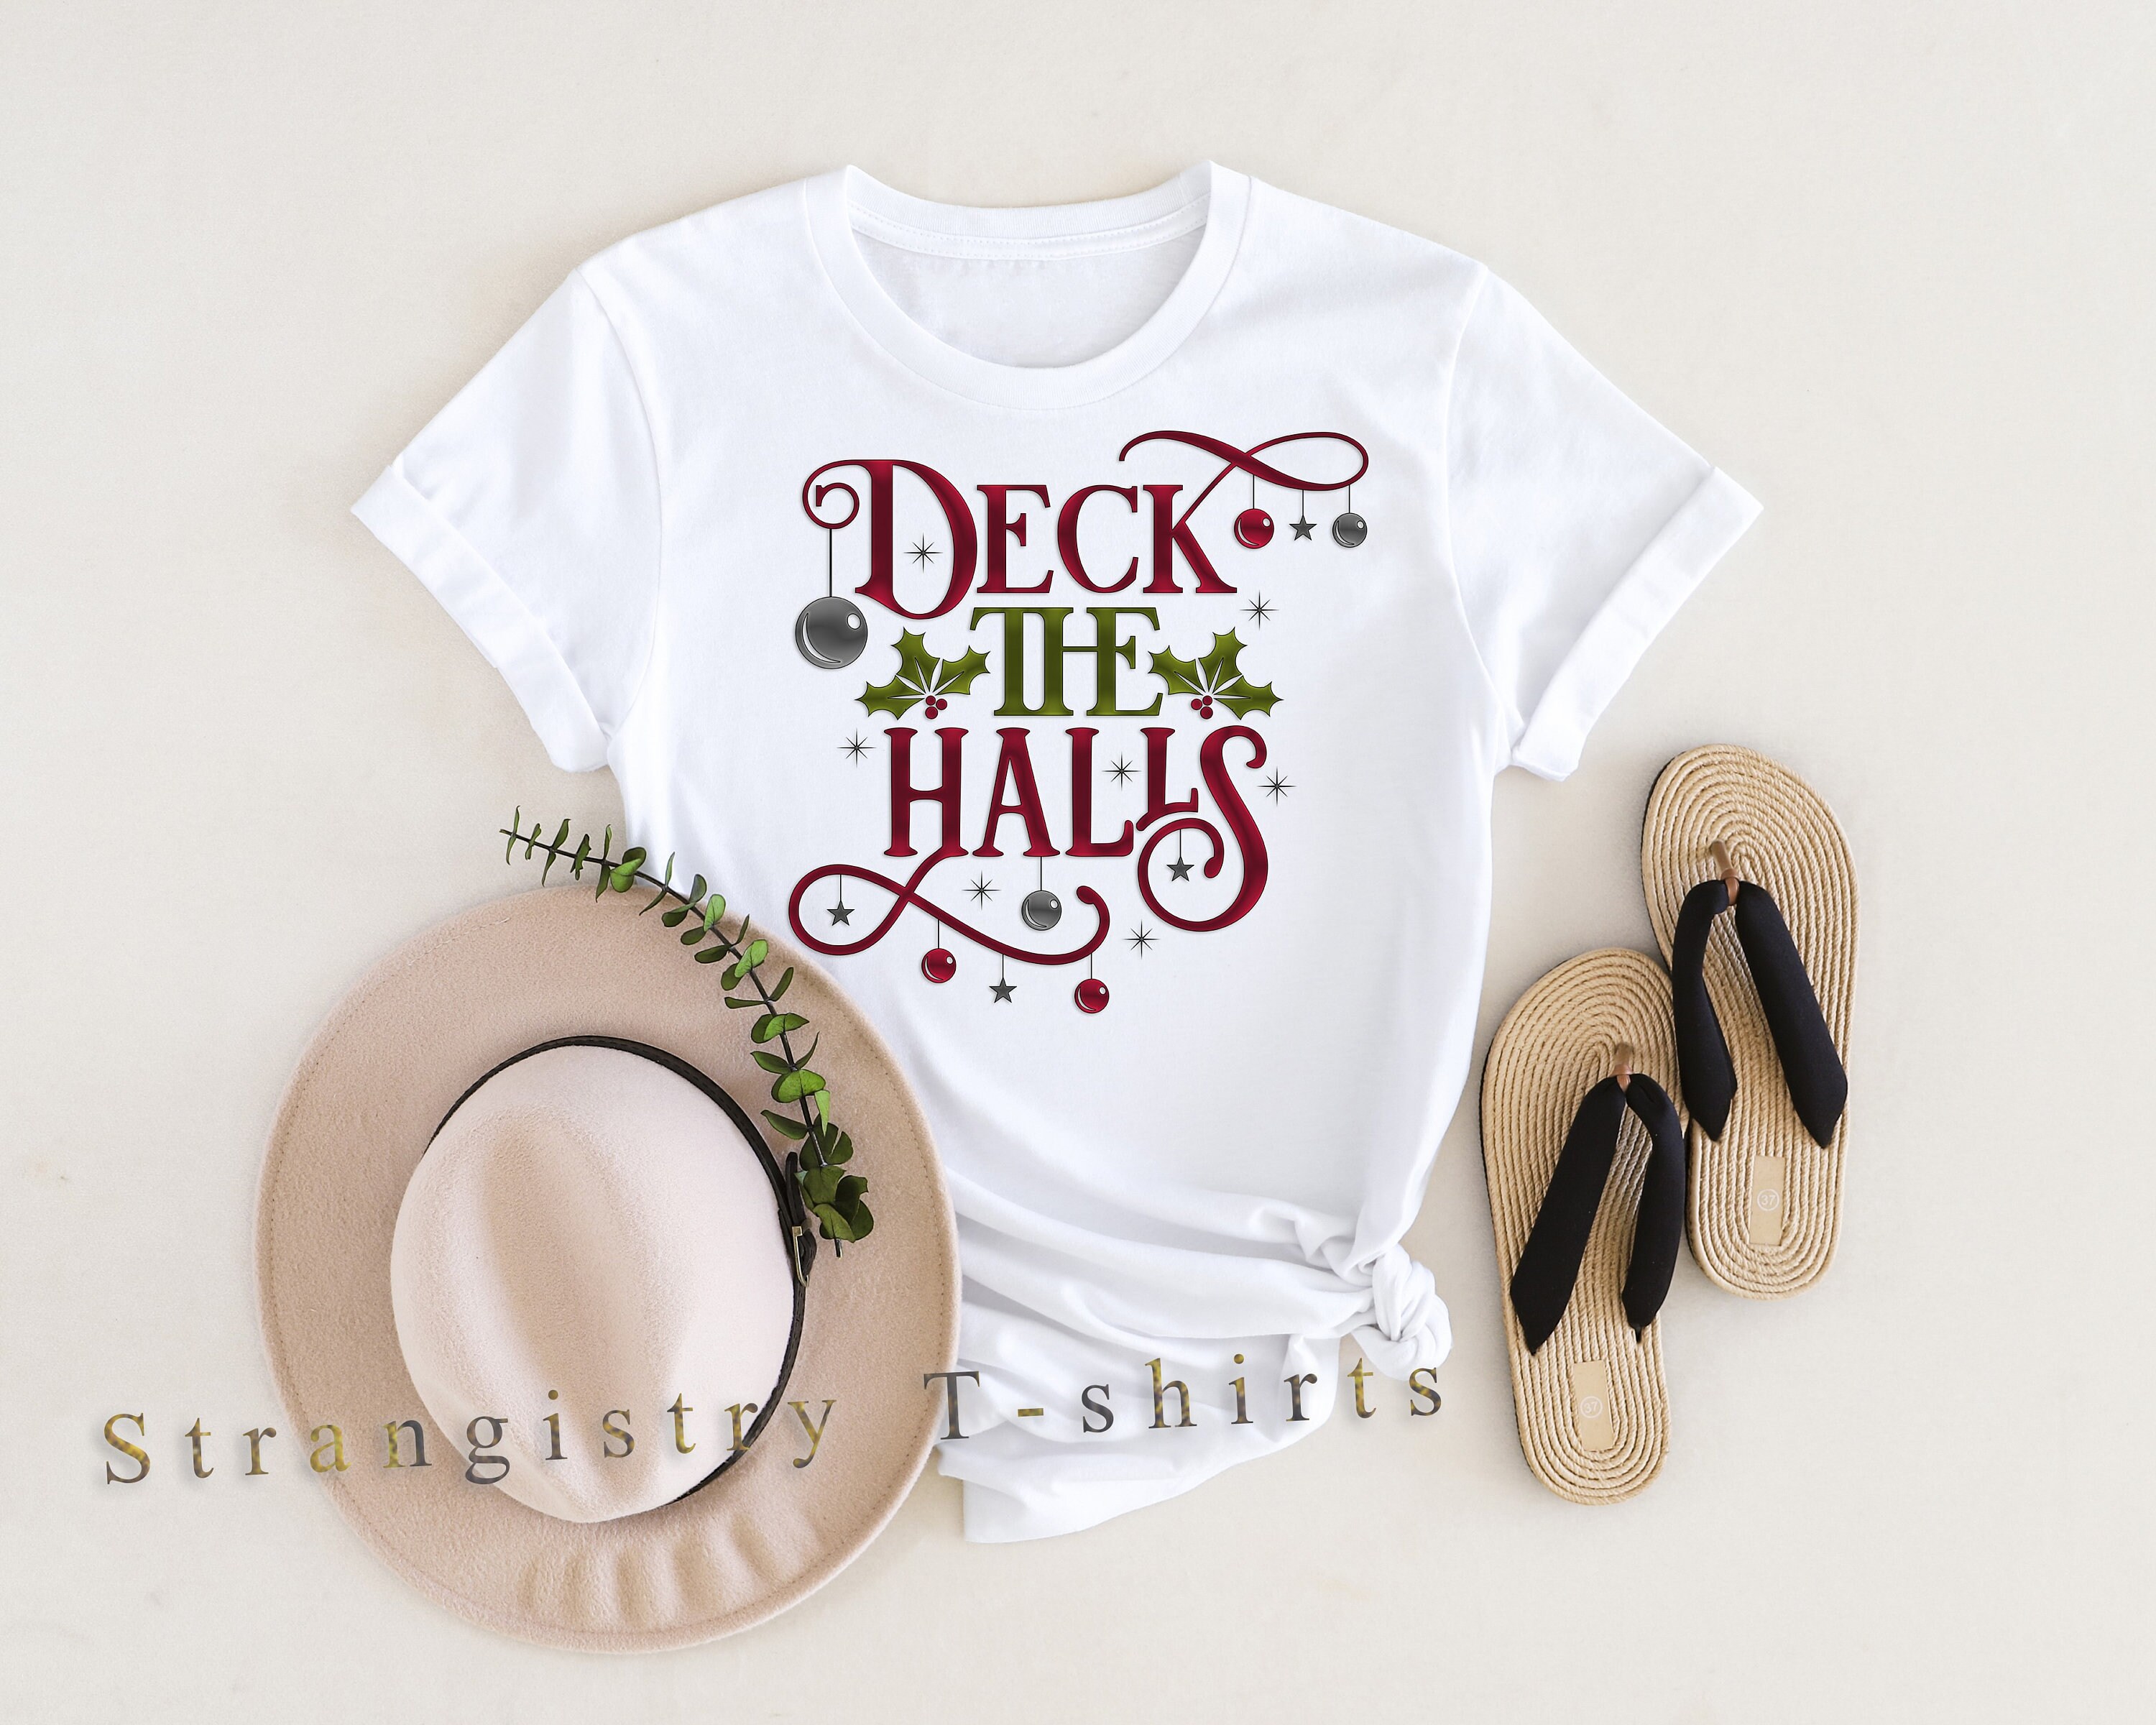 Christmas T-shirt with the Text of Deck the Halls, Christian T-shirt for Christmas, Christmas Gift for Family, Friends and Loved Ones.